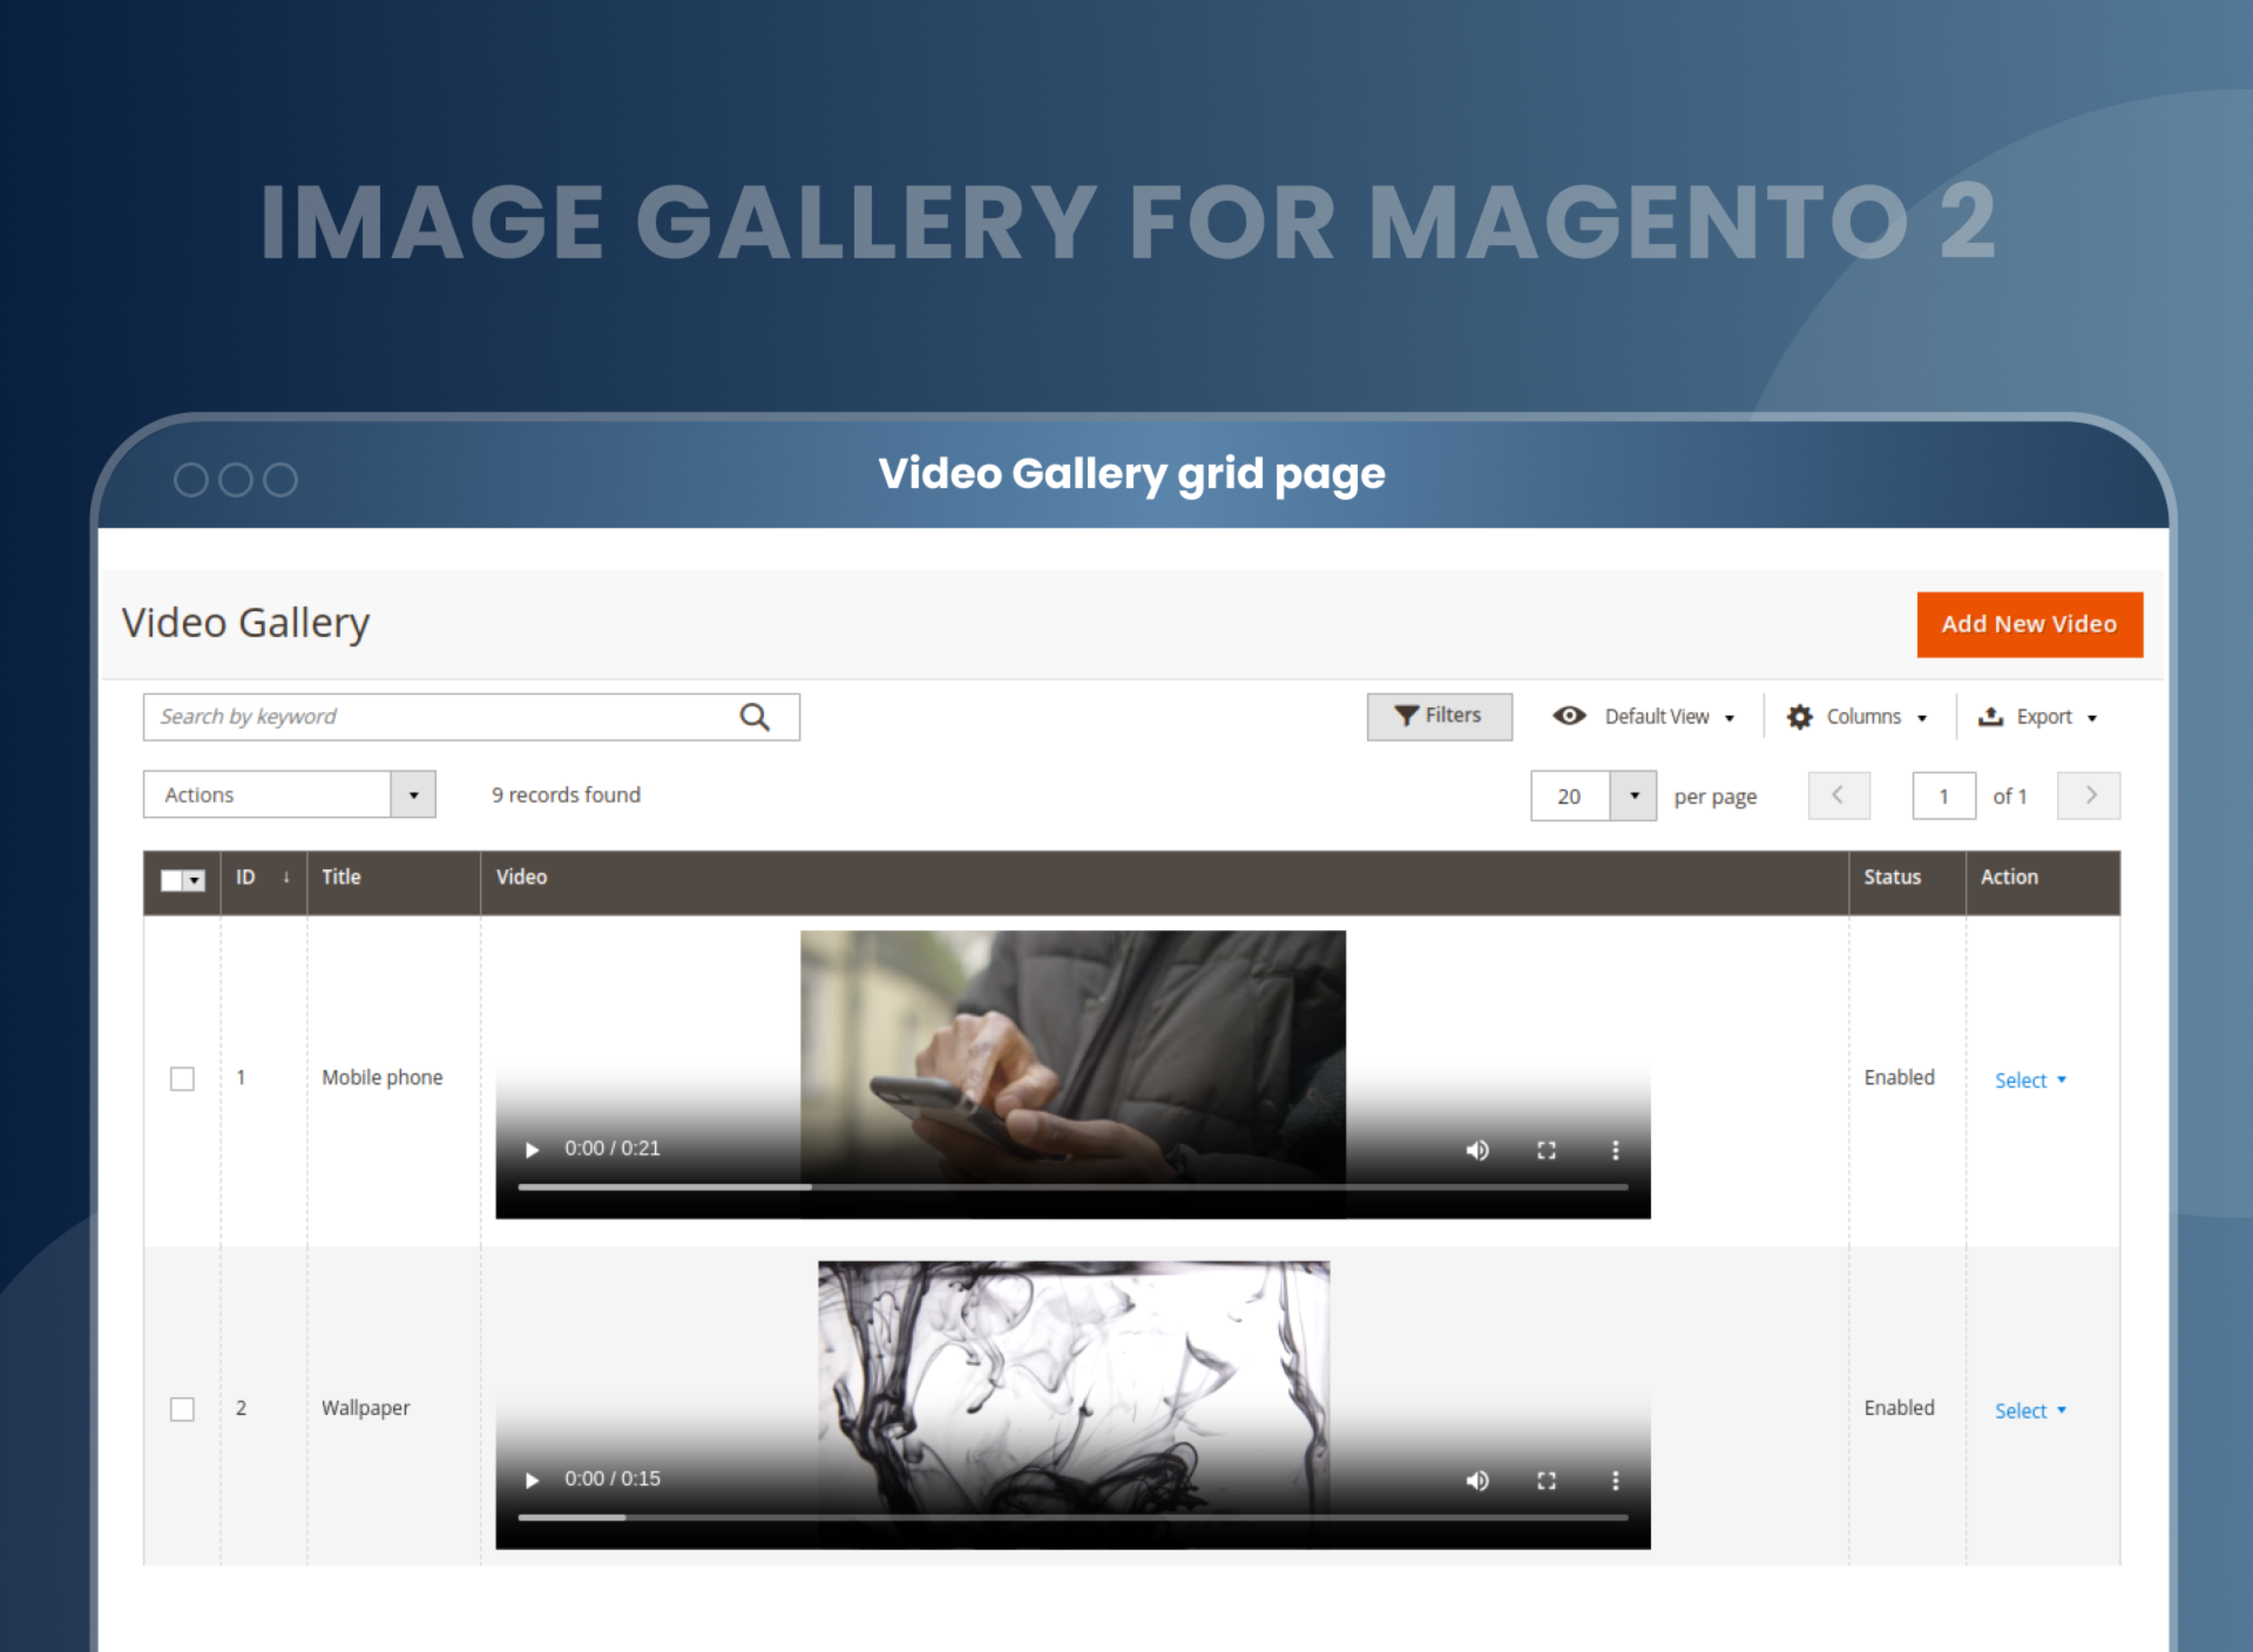  Video Gallery grid page